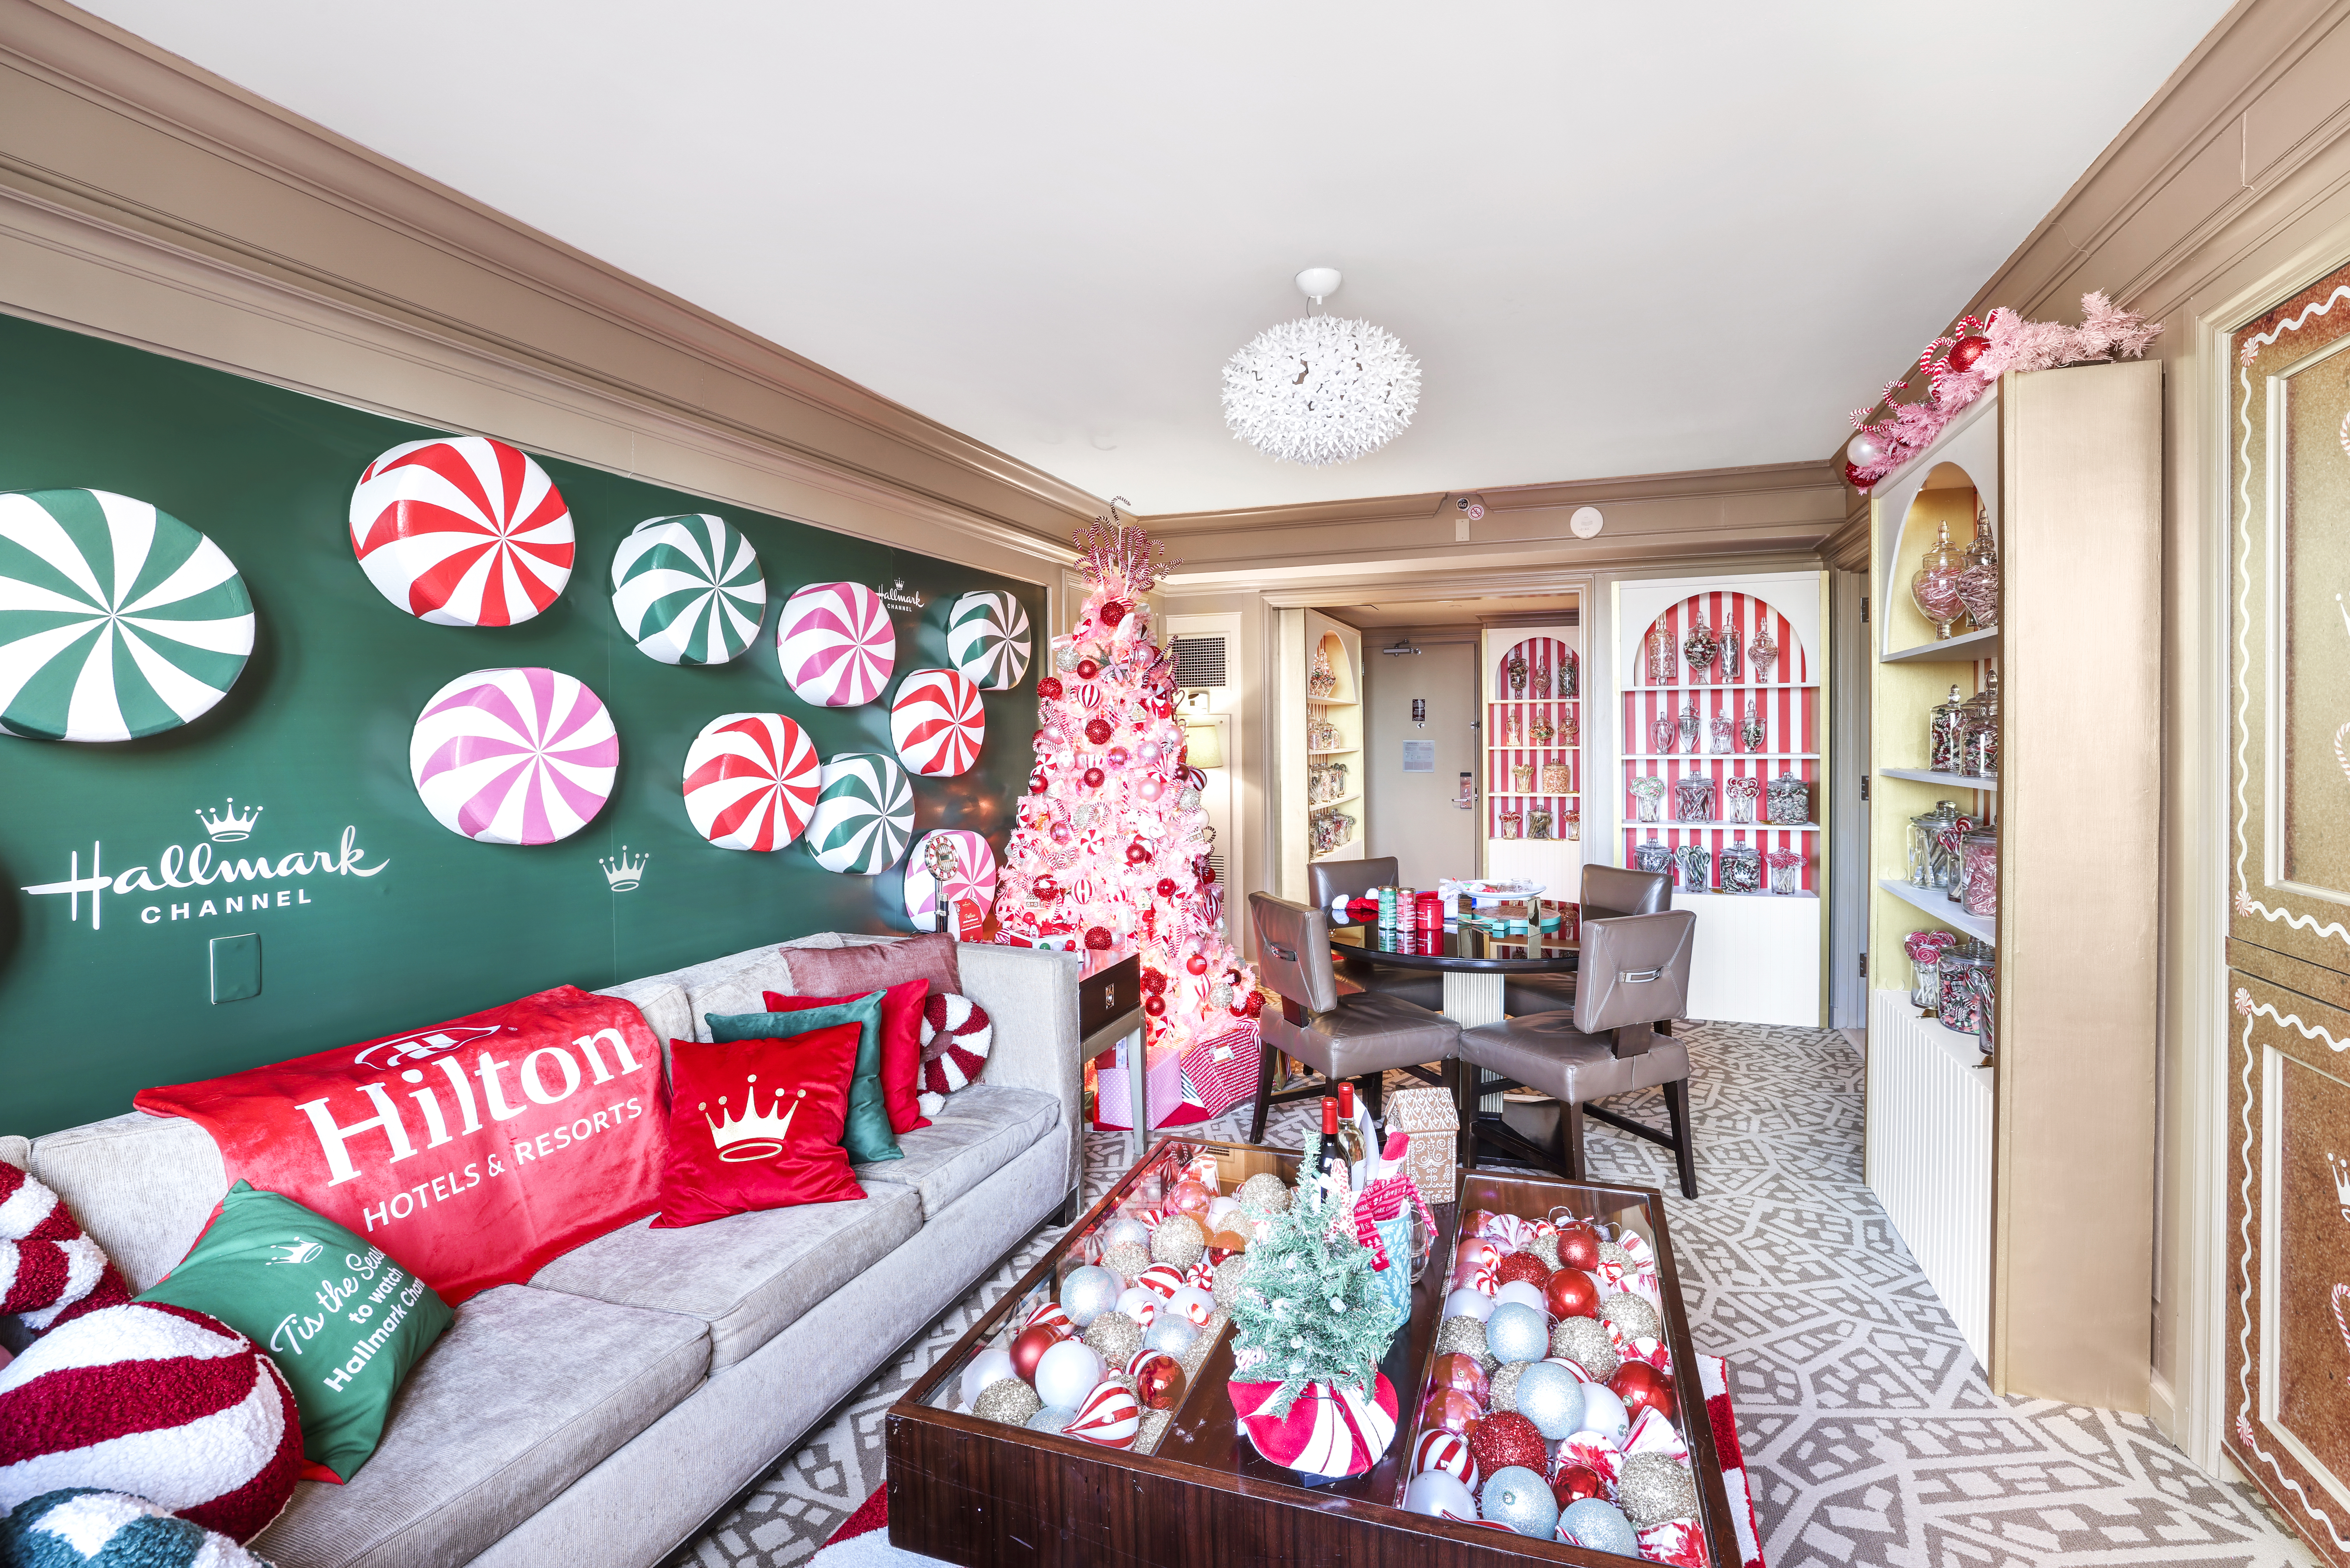 Hilton and Hallmark Channel - Hallmark’s Holiday Sweetest Suite at Hilton New York Times Square - Seating